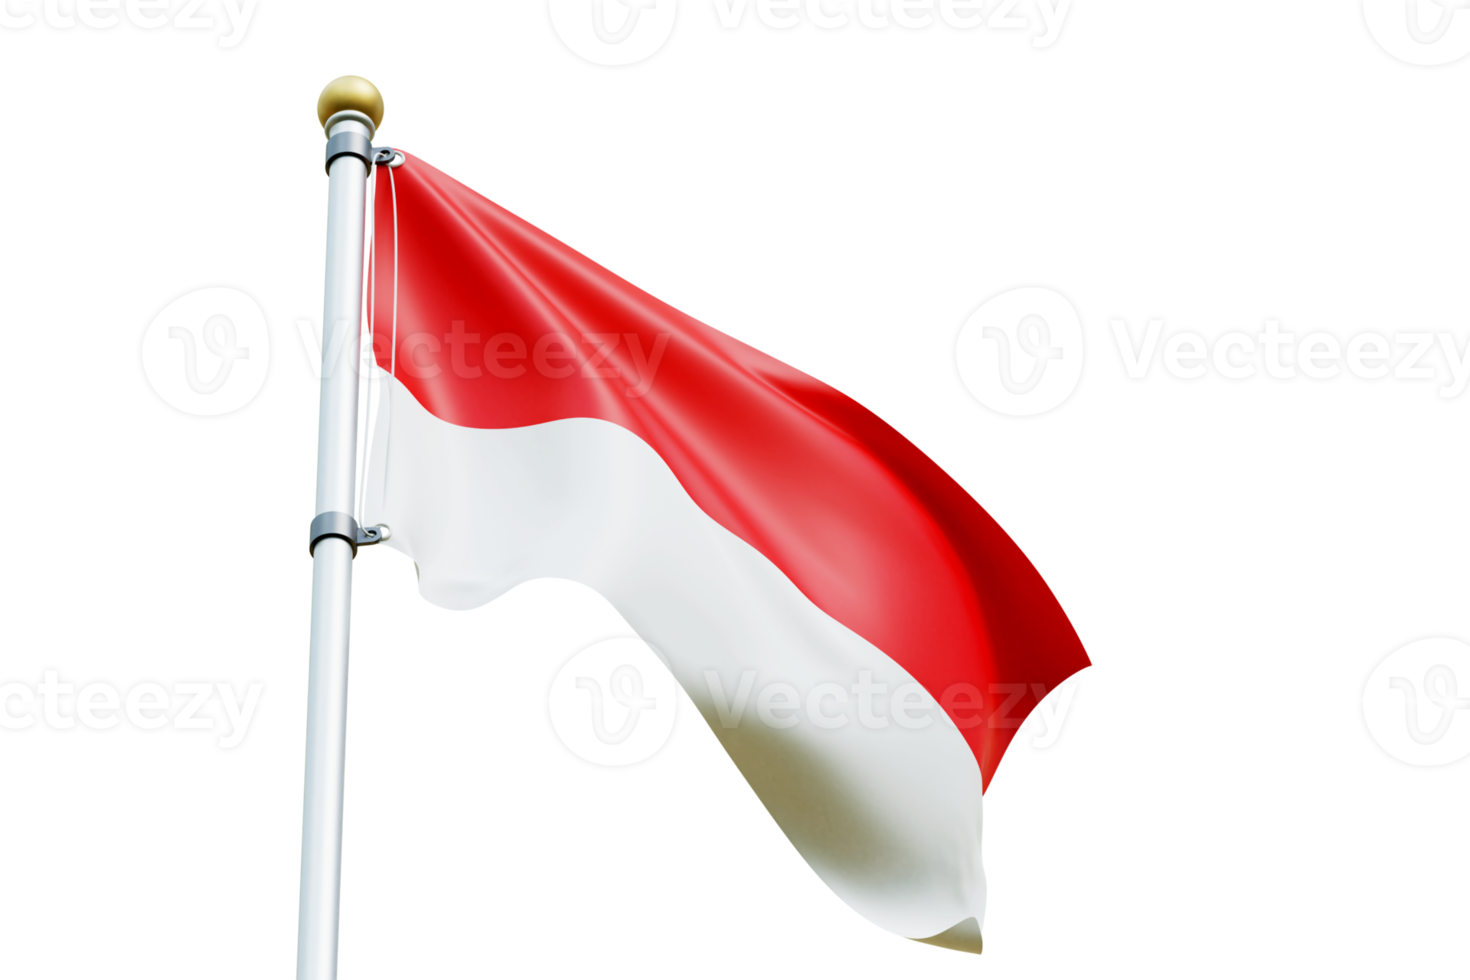 Flag Of indonesia 3d Rendering png